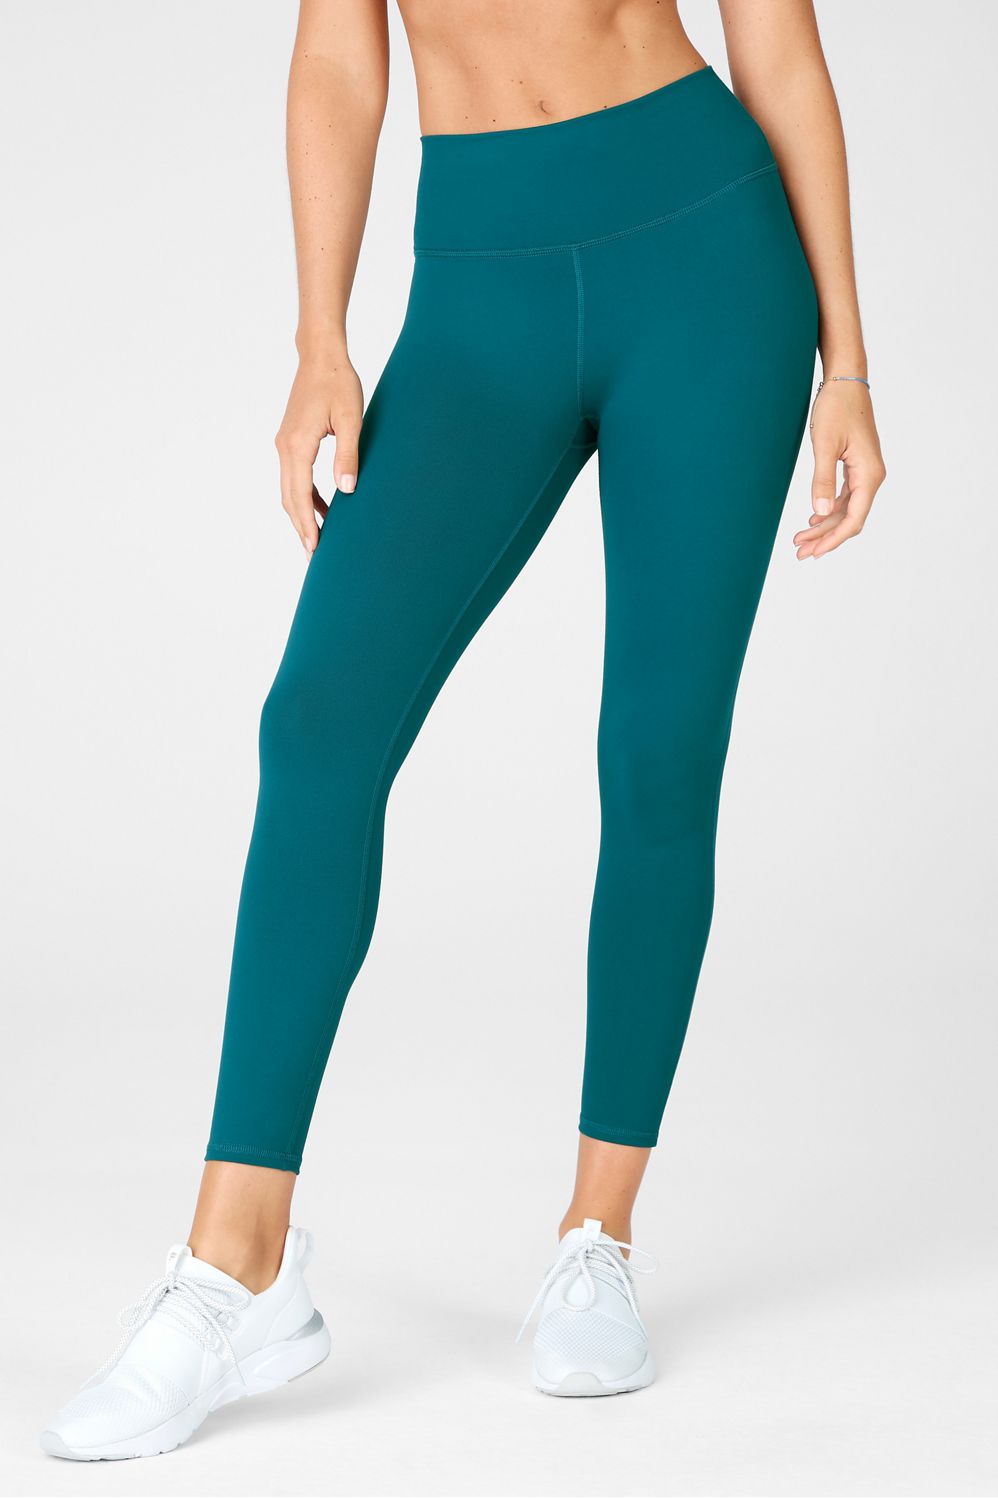 Fabletics Seamless High-Waisted Mesh Legging XS Teal Fjord Colored Pants  Workout